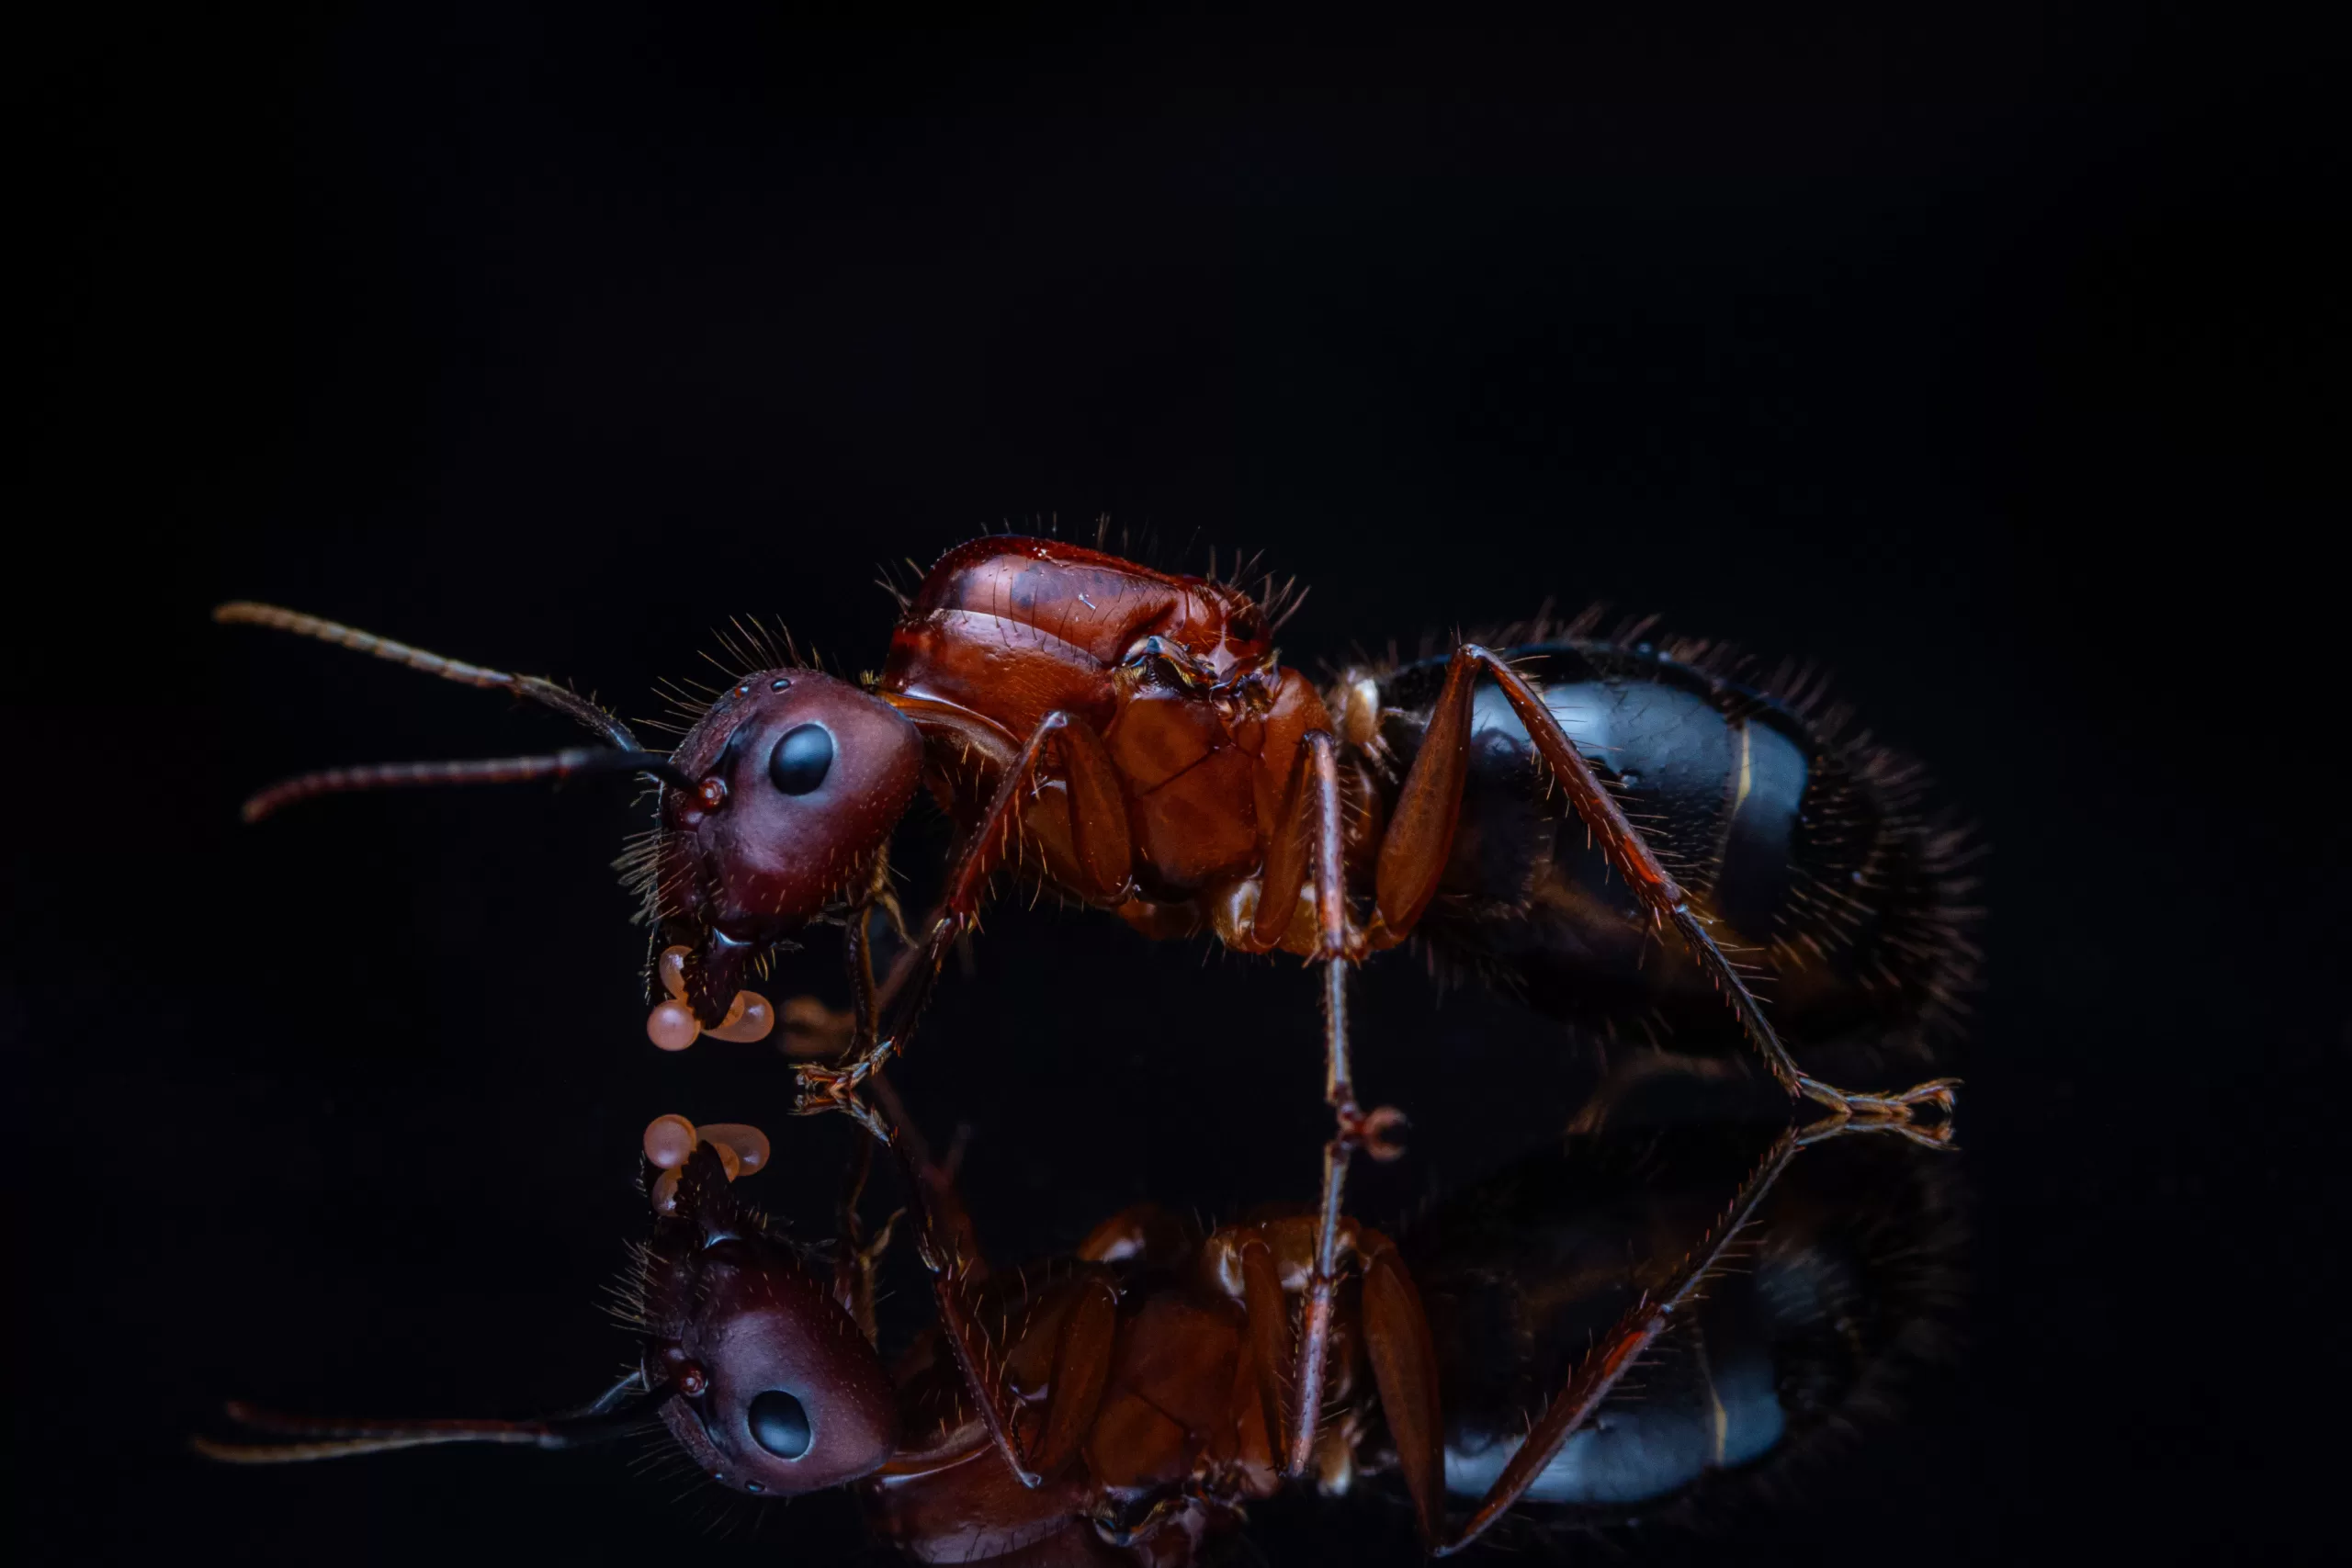 A Camponotus floridanus queen holds her eggs.